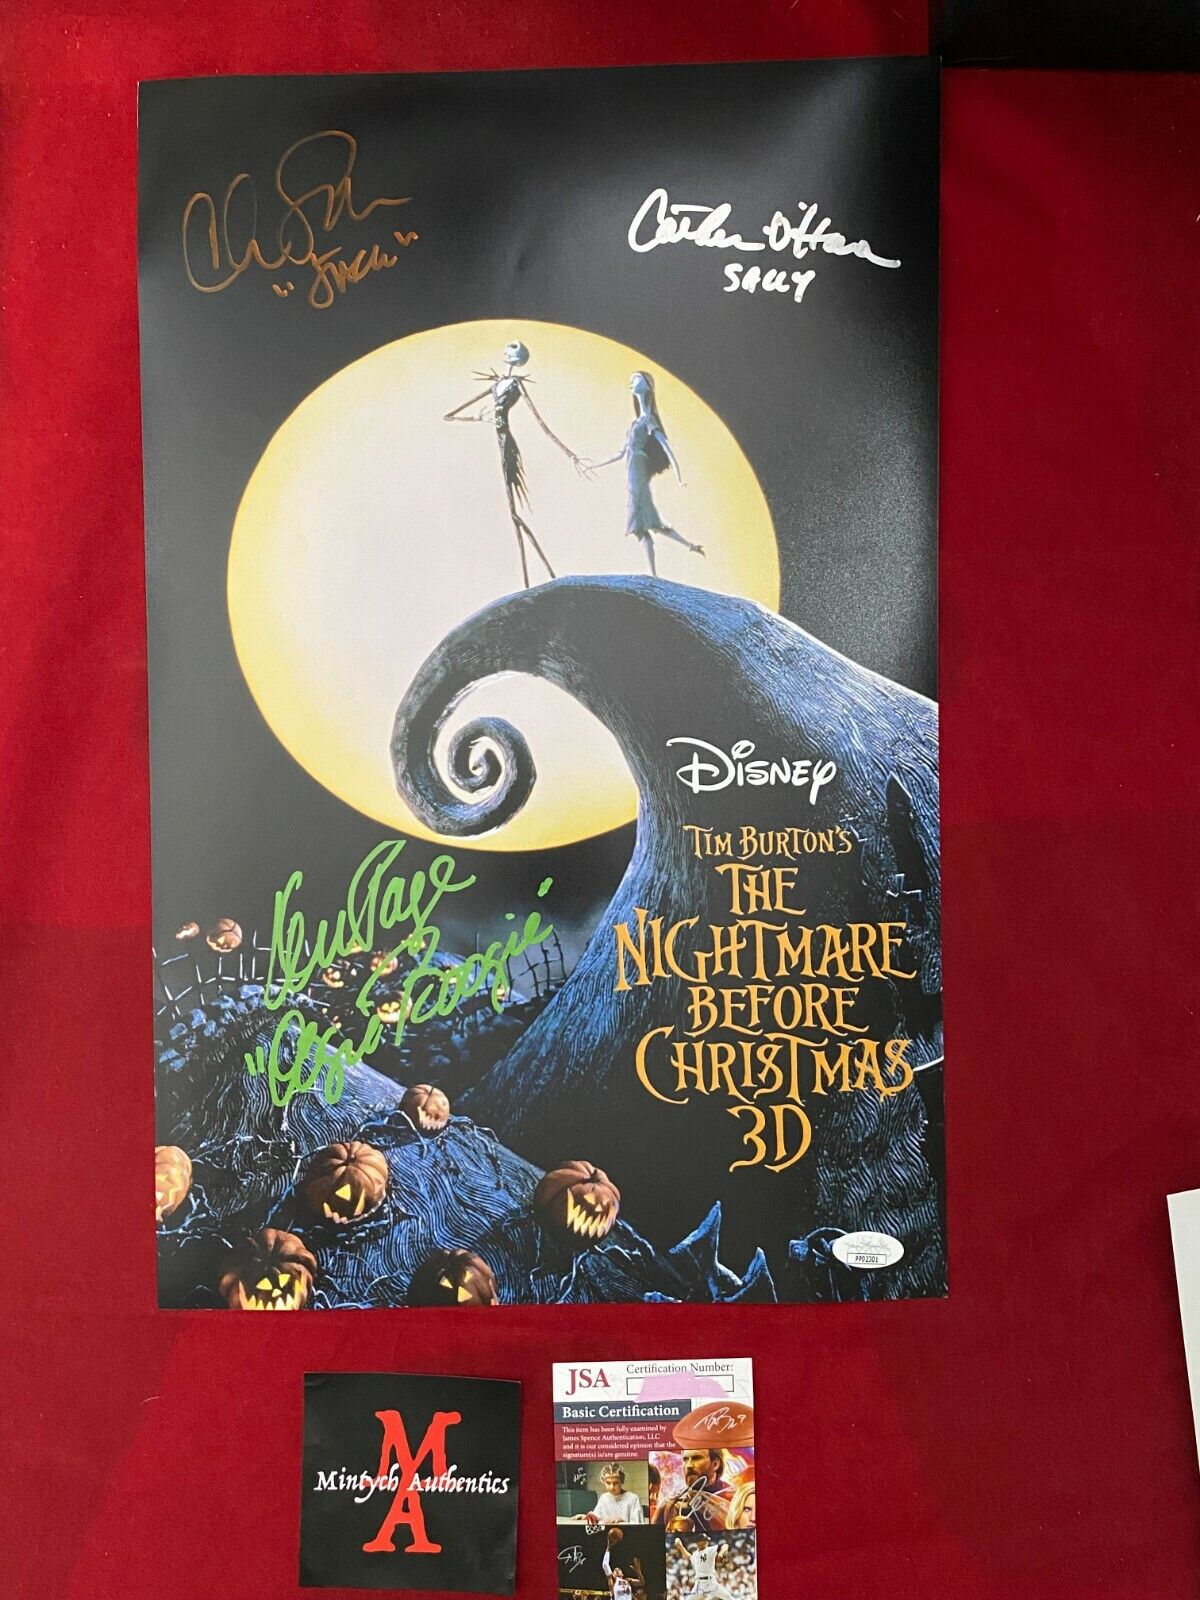 THE NIGHTMARE BEFORE CHRISTMAS CAST SIGNED 11X17 Photo Poster painting! SARANDON, O'HARA, PAGE!